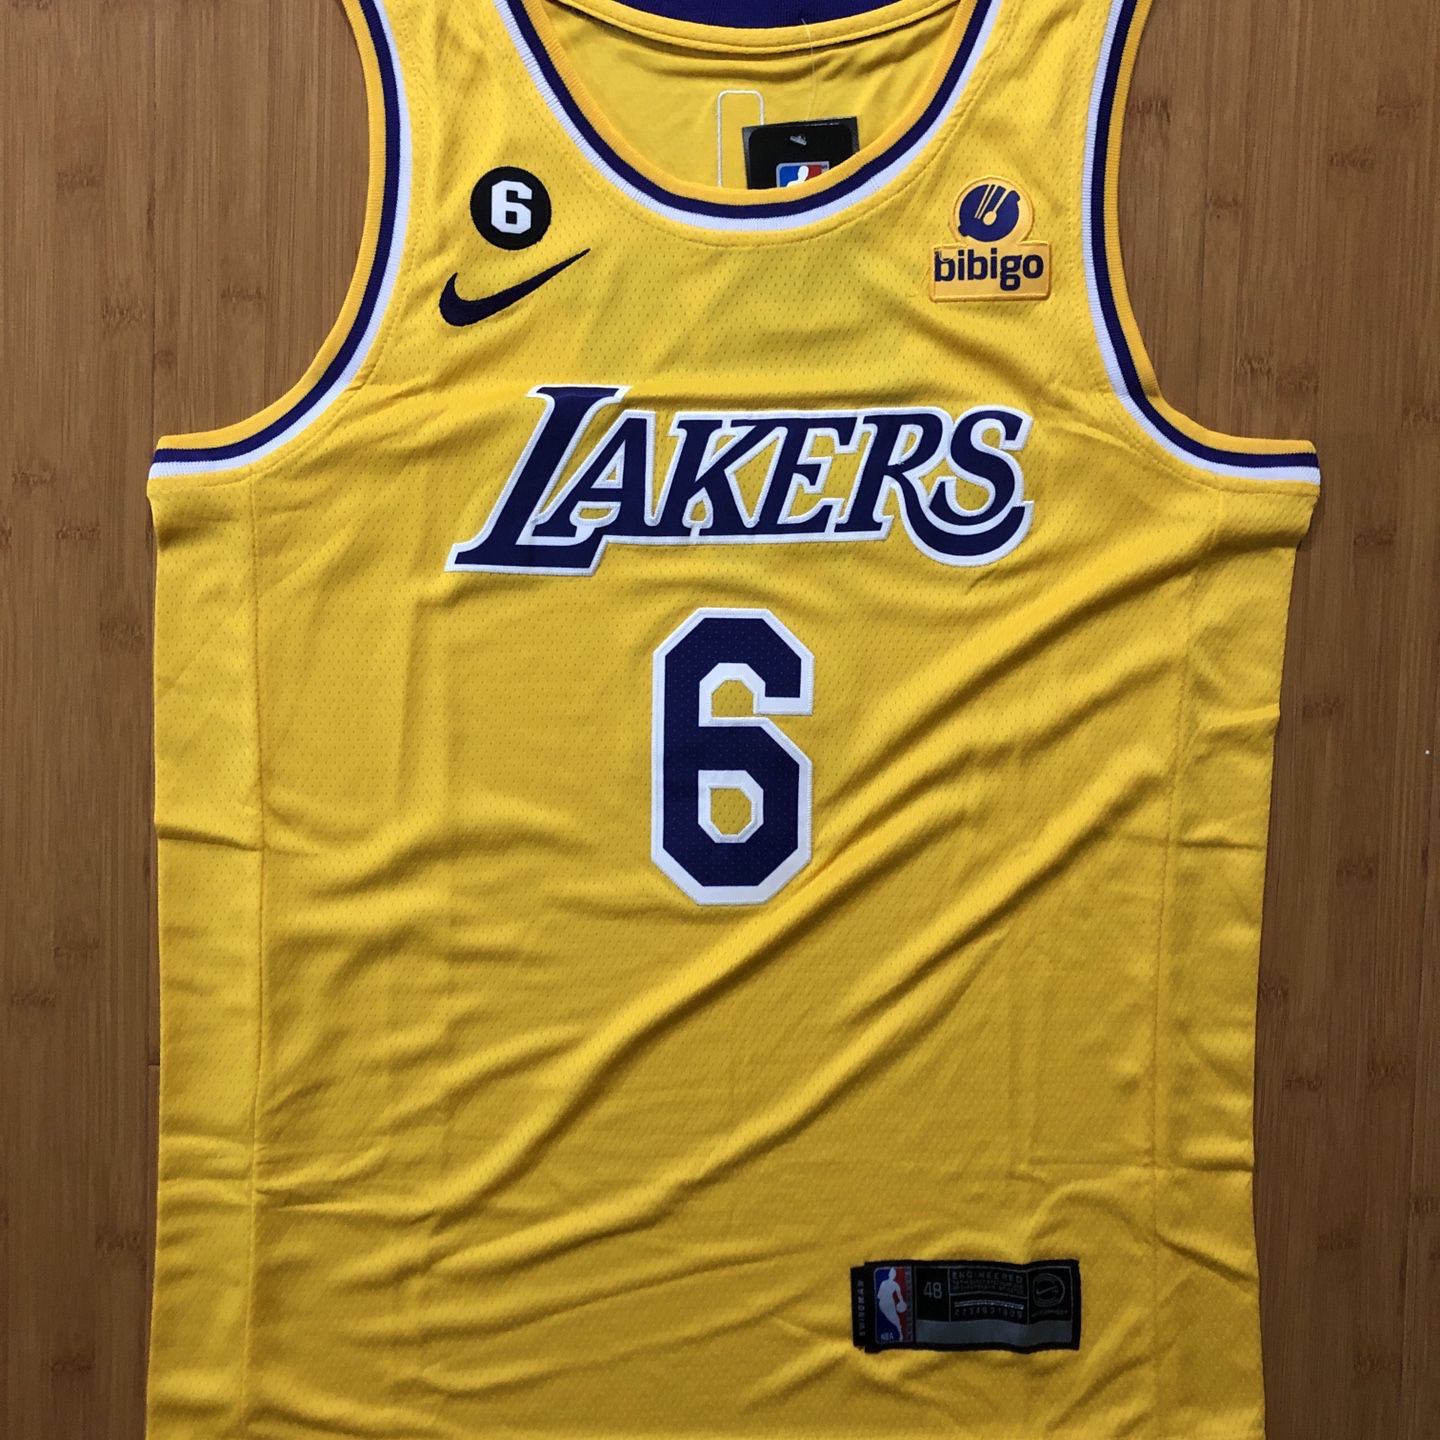 NEW , Laker's Dog Jersey for Sale in Laguna Beach, CA - OfferUp